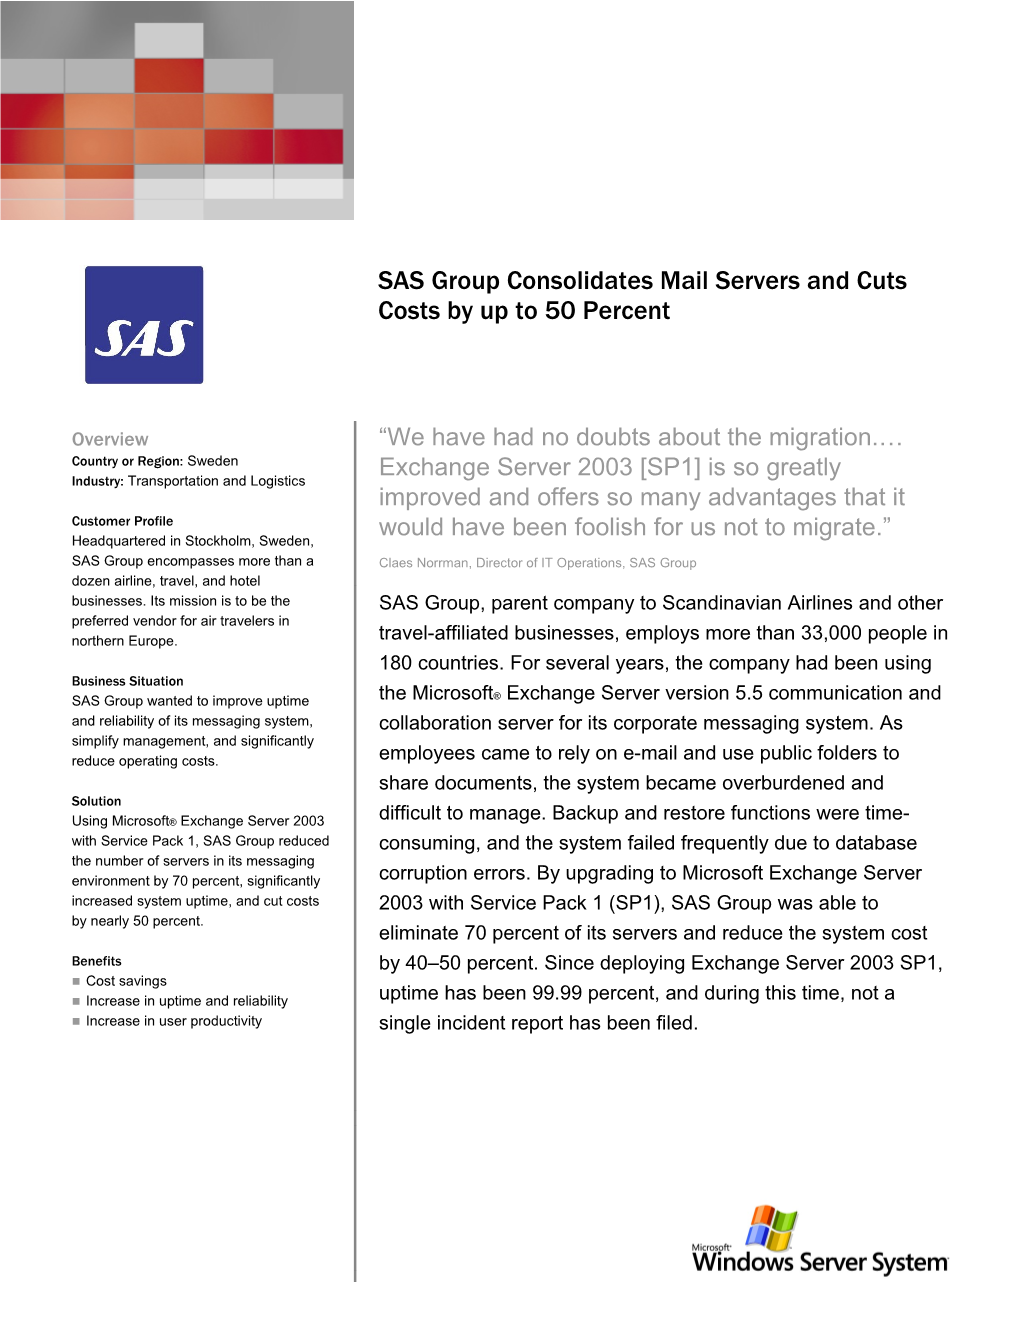 SAS Group Consolidates Mail Servers and Cuts Costs by up to 50 Percent